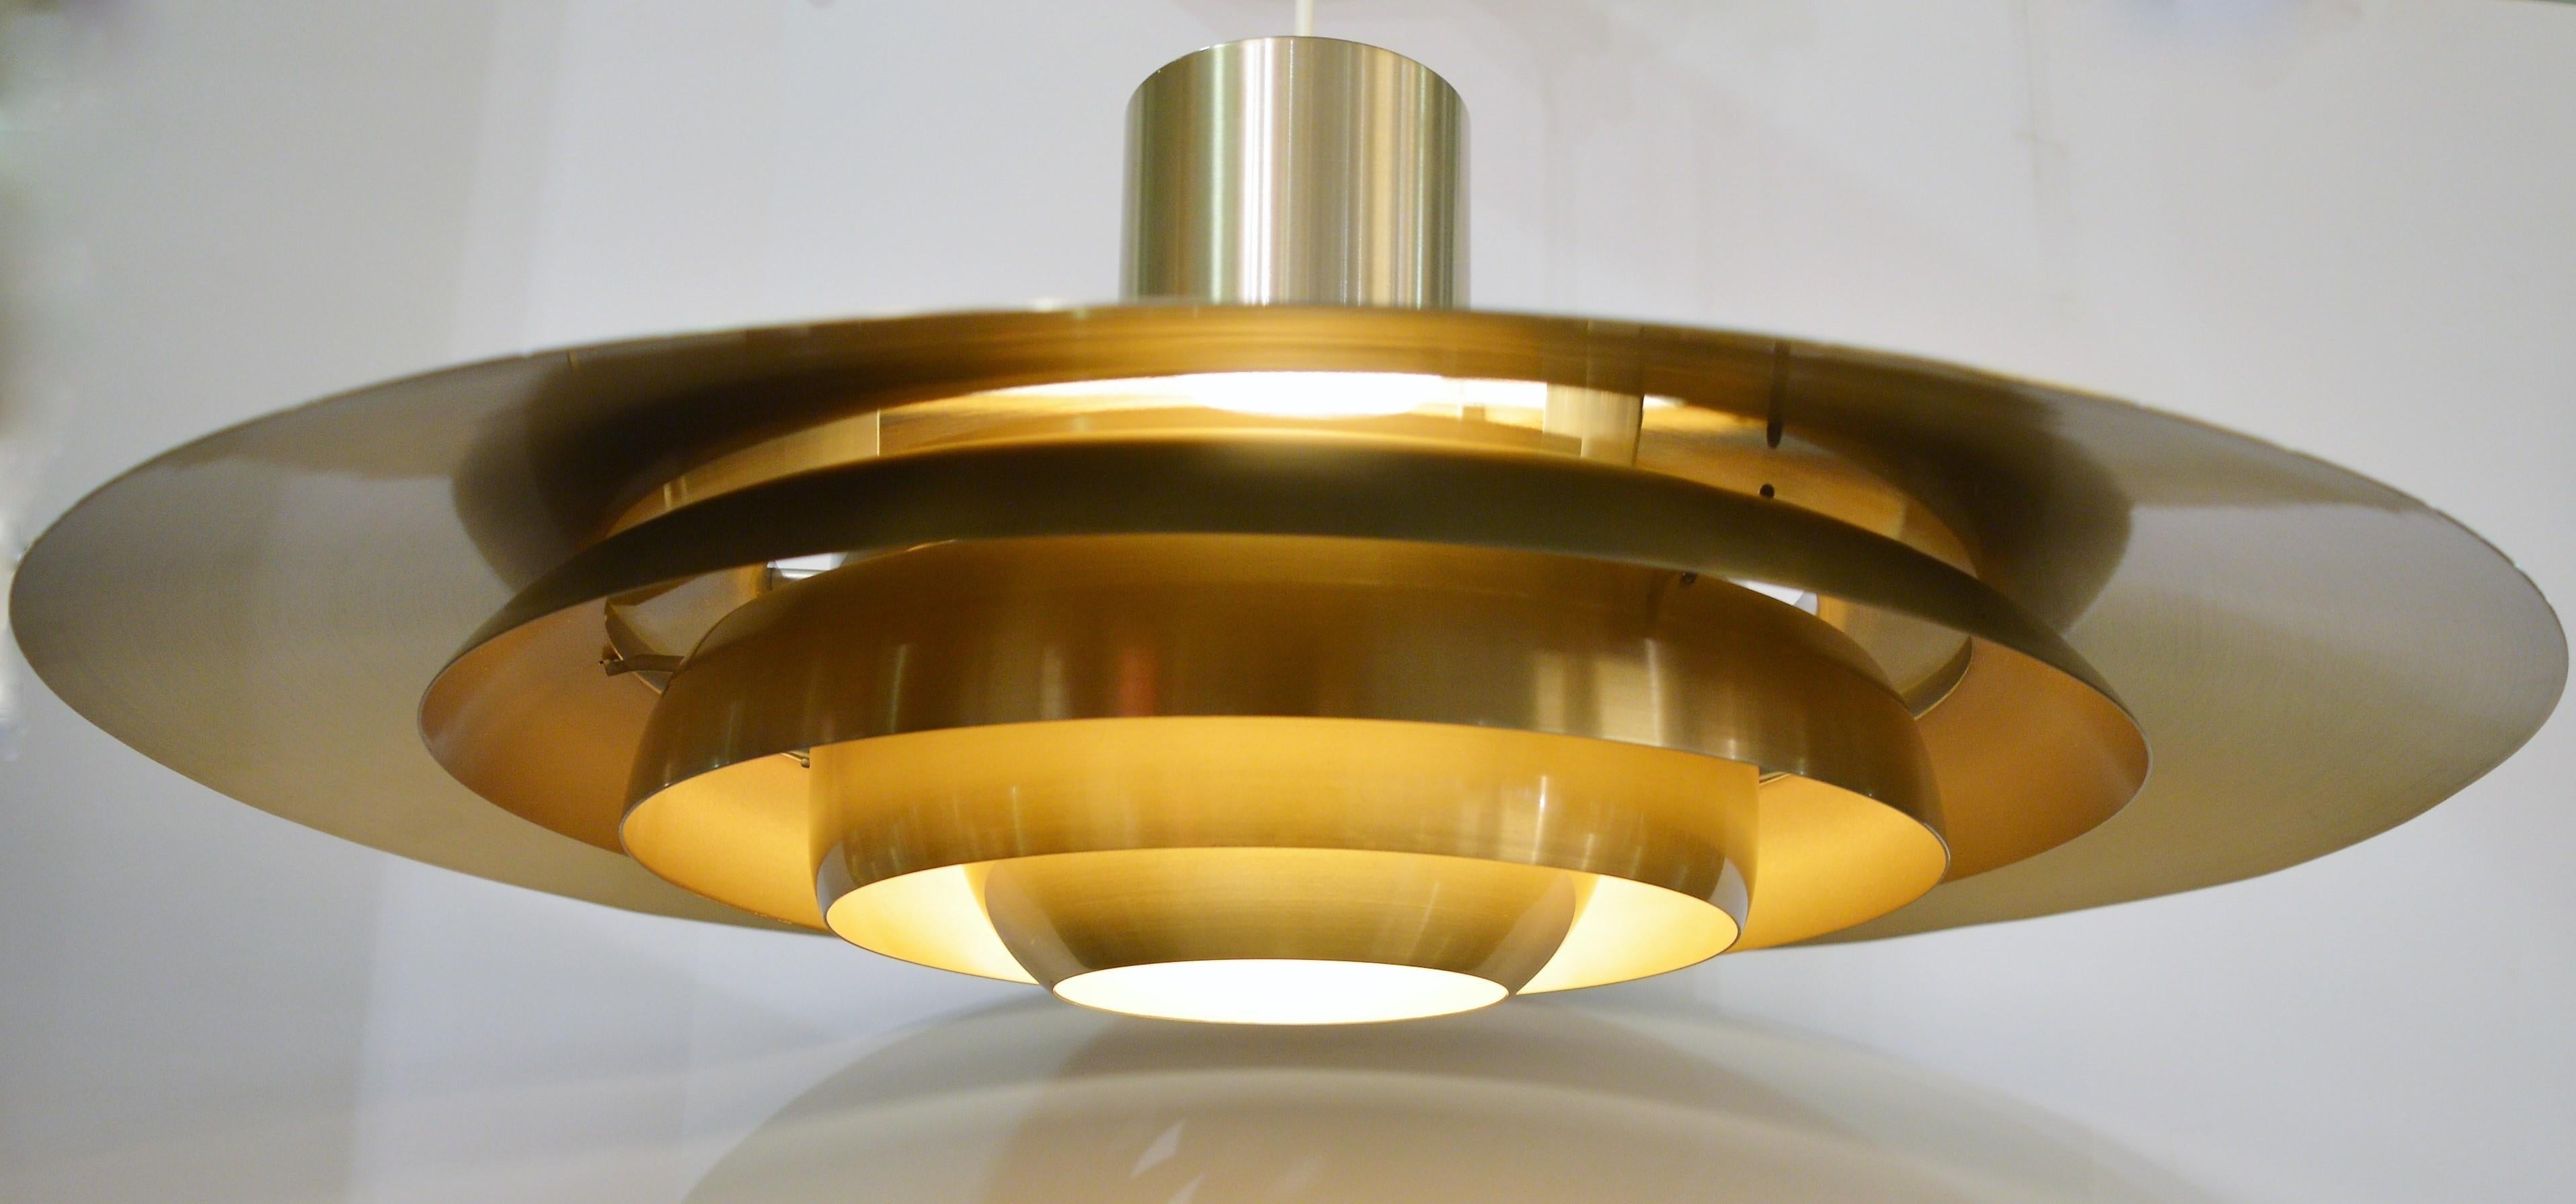 A wonderful Danish modern large scale multi-tier pendant that offers impressive impact and yet a slimmer side profile. Designed by Jørgen Kastholm & Preben Fabricius for Nordisk Solar Compagni, Denmark, 1960s. Made of lightly brassed spun aluminium